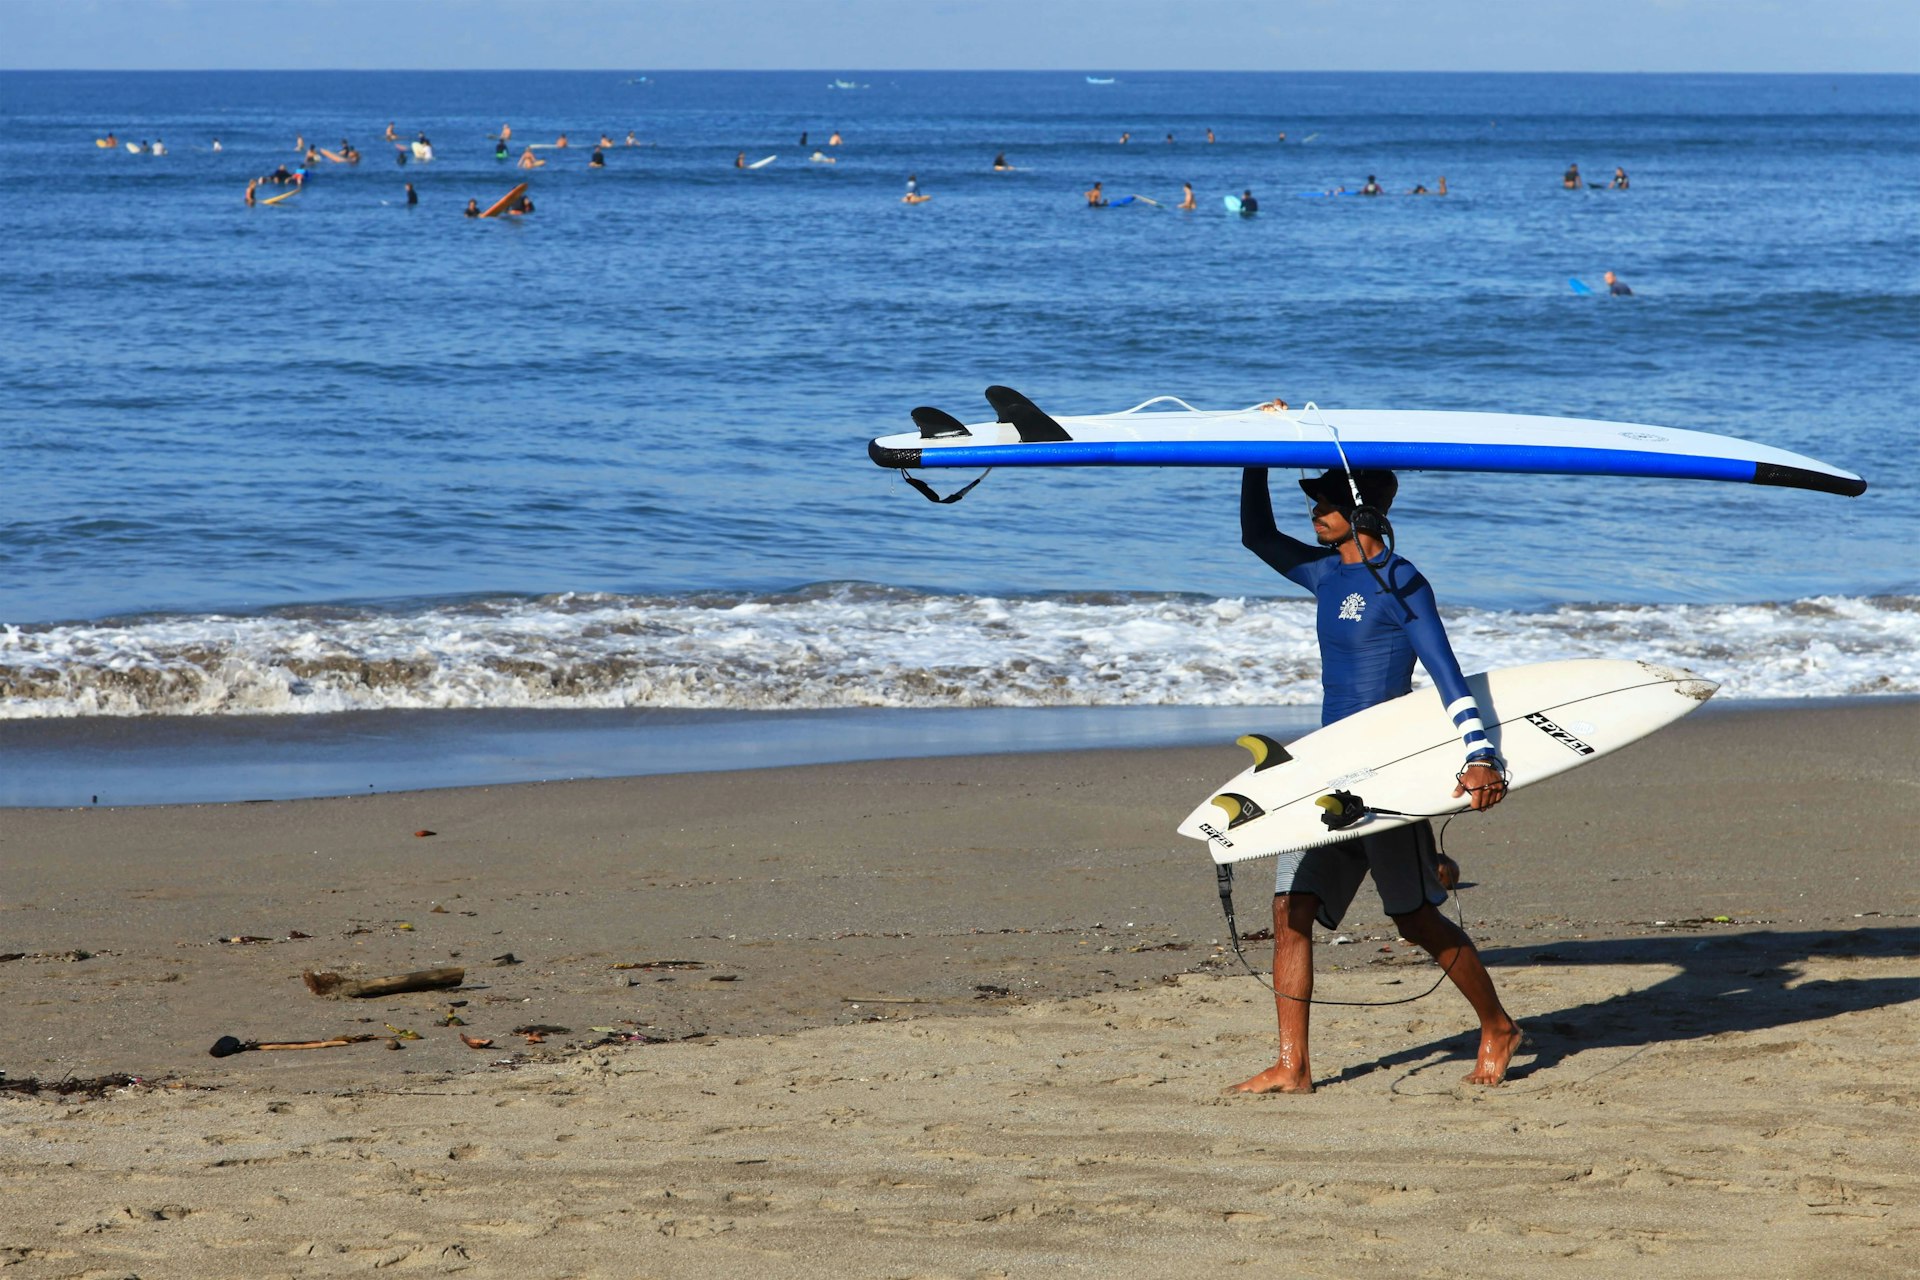 An Indonesian surf instructor walking on the beach carrying a two surfboards with one on his head at Batu Bolong Beach in Bali and surfers in the sea.